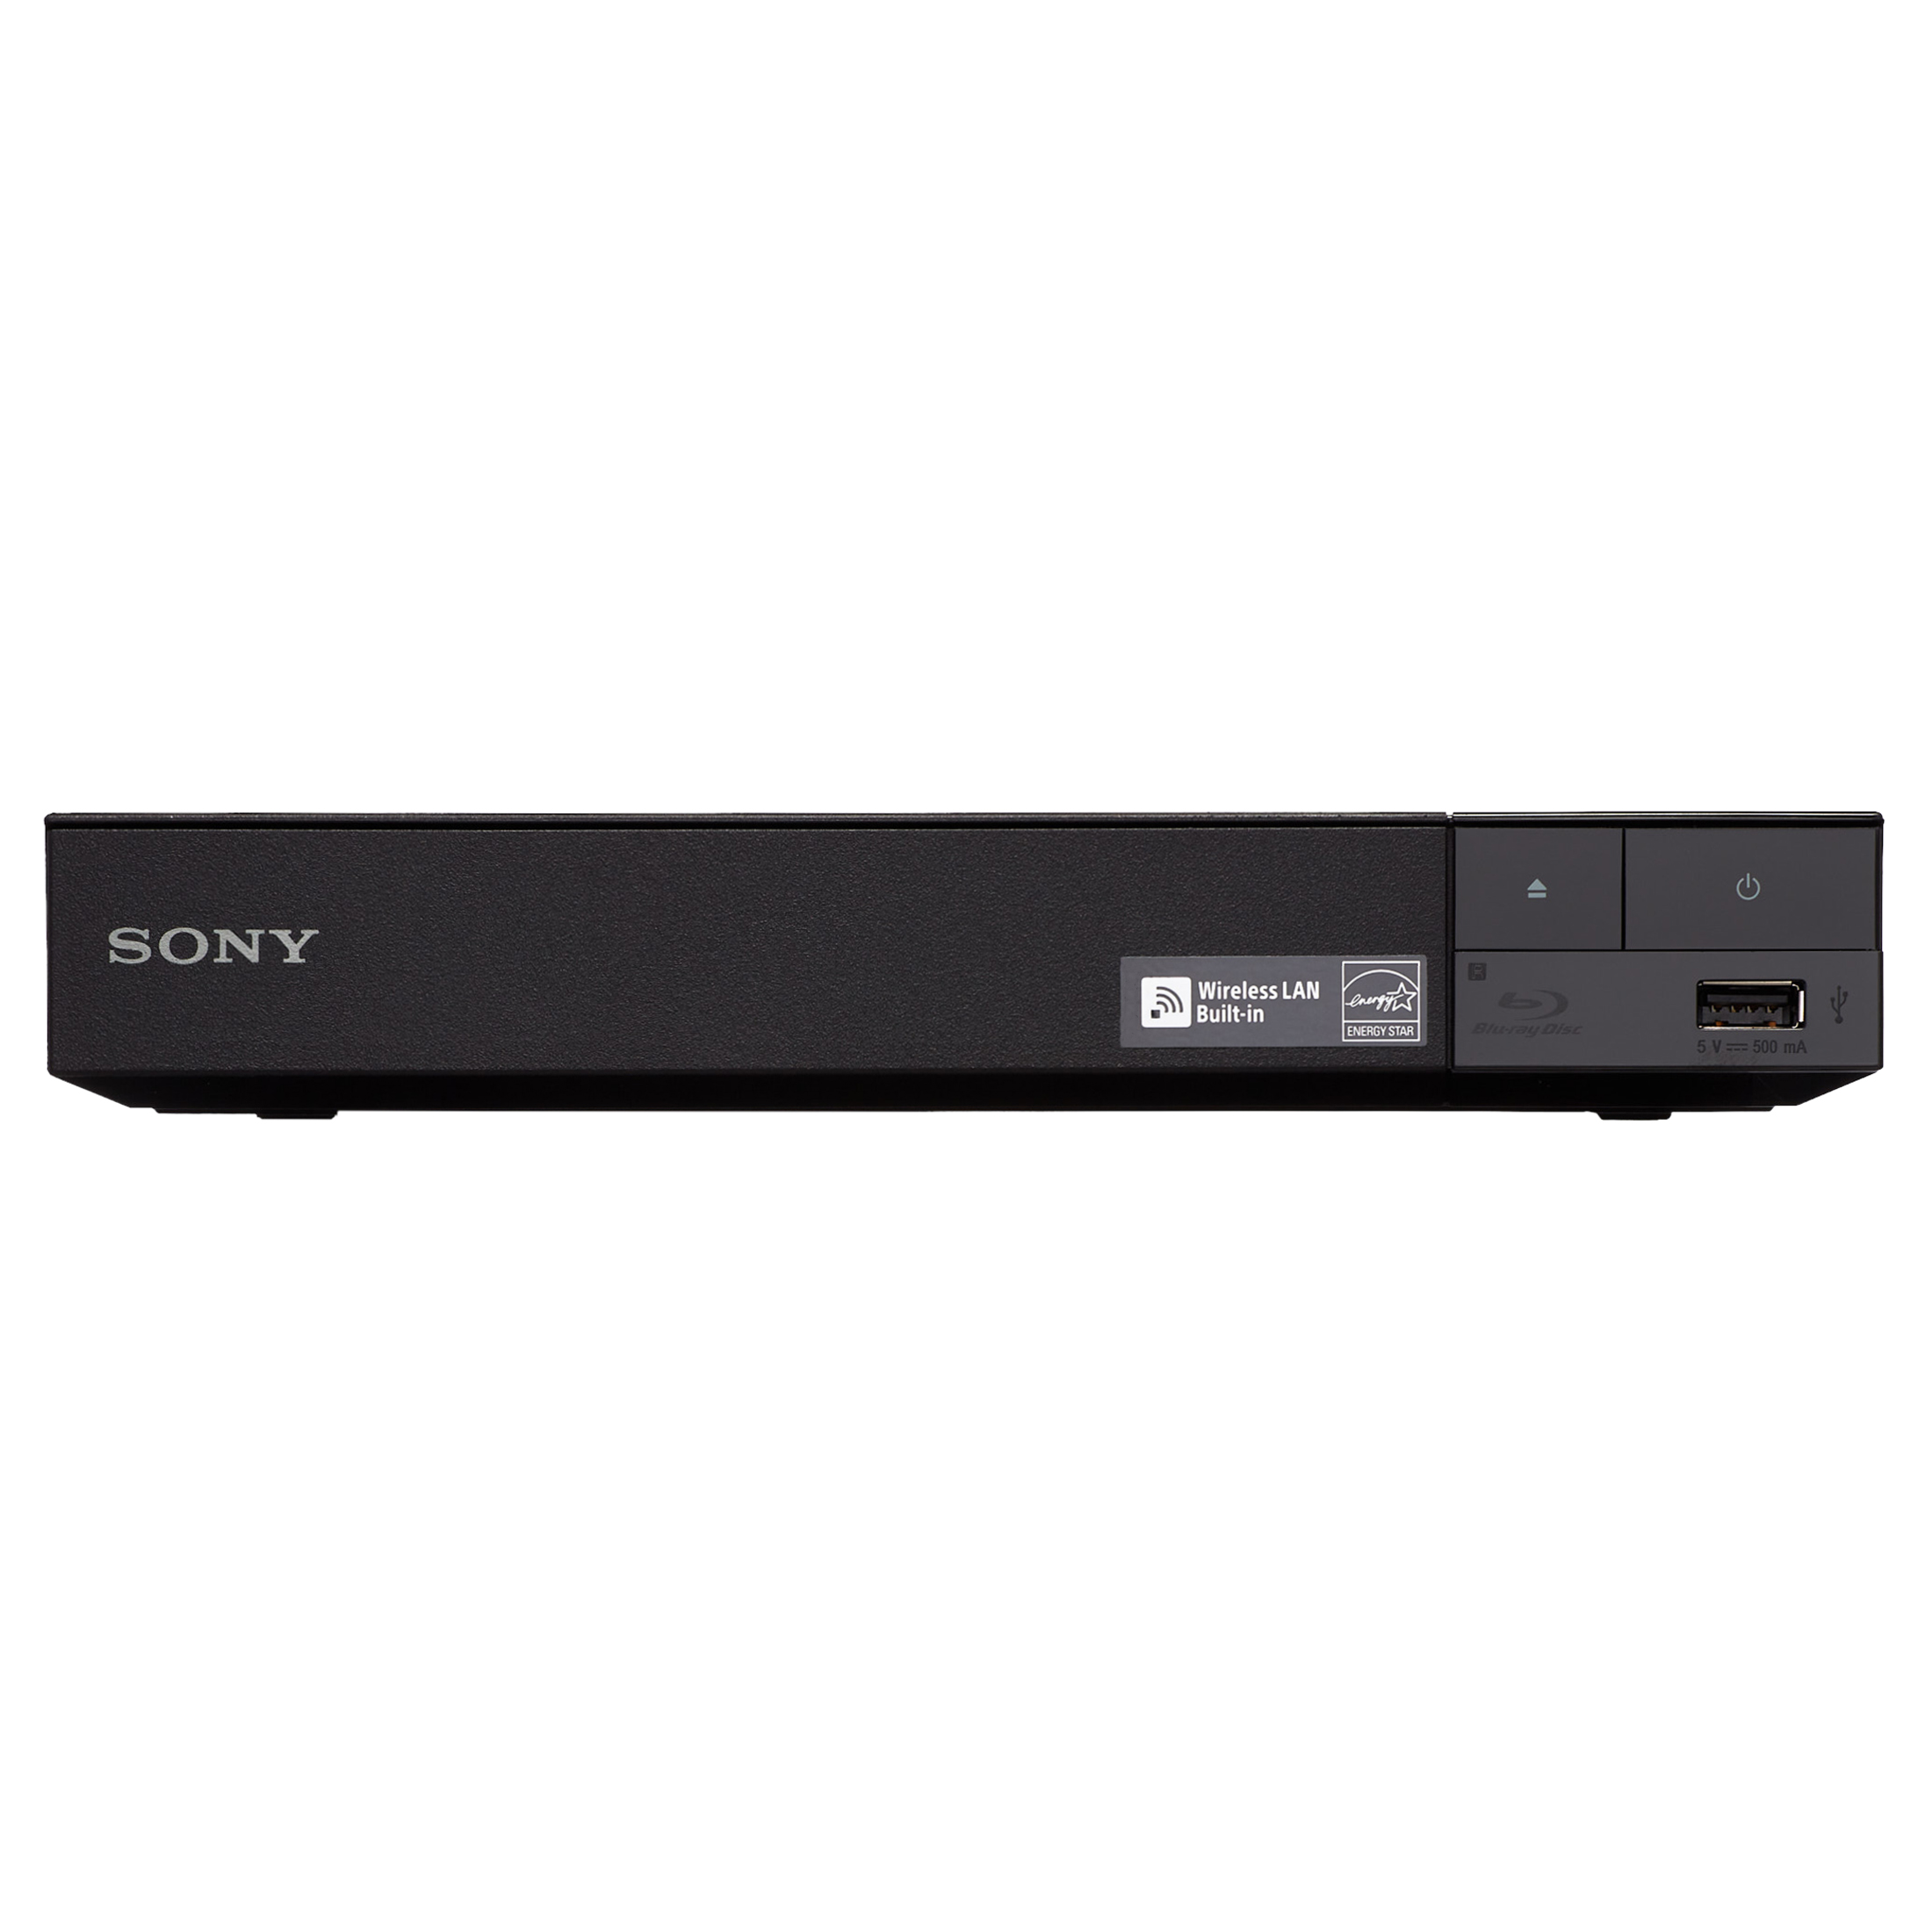 Sony BDP-S3700 Full HD Steaming Blu-ray DVD Player with built-in Wi-Fi, Dolby Digital TrueHD/DTS, and DVD upscaling - image 1 of 9